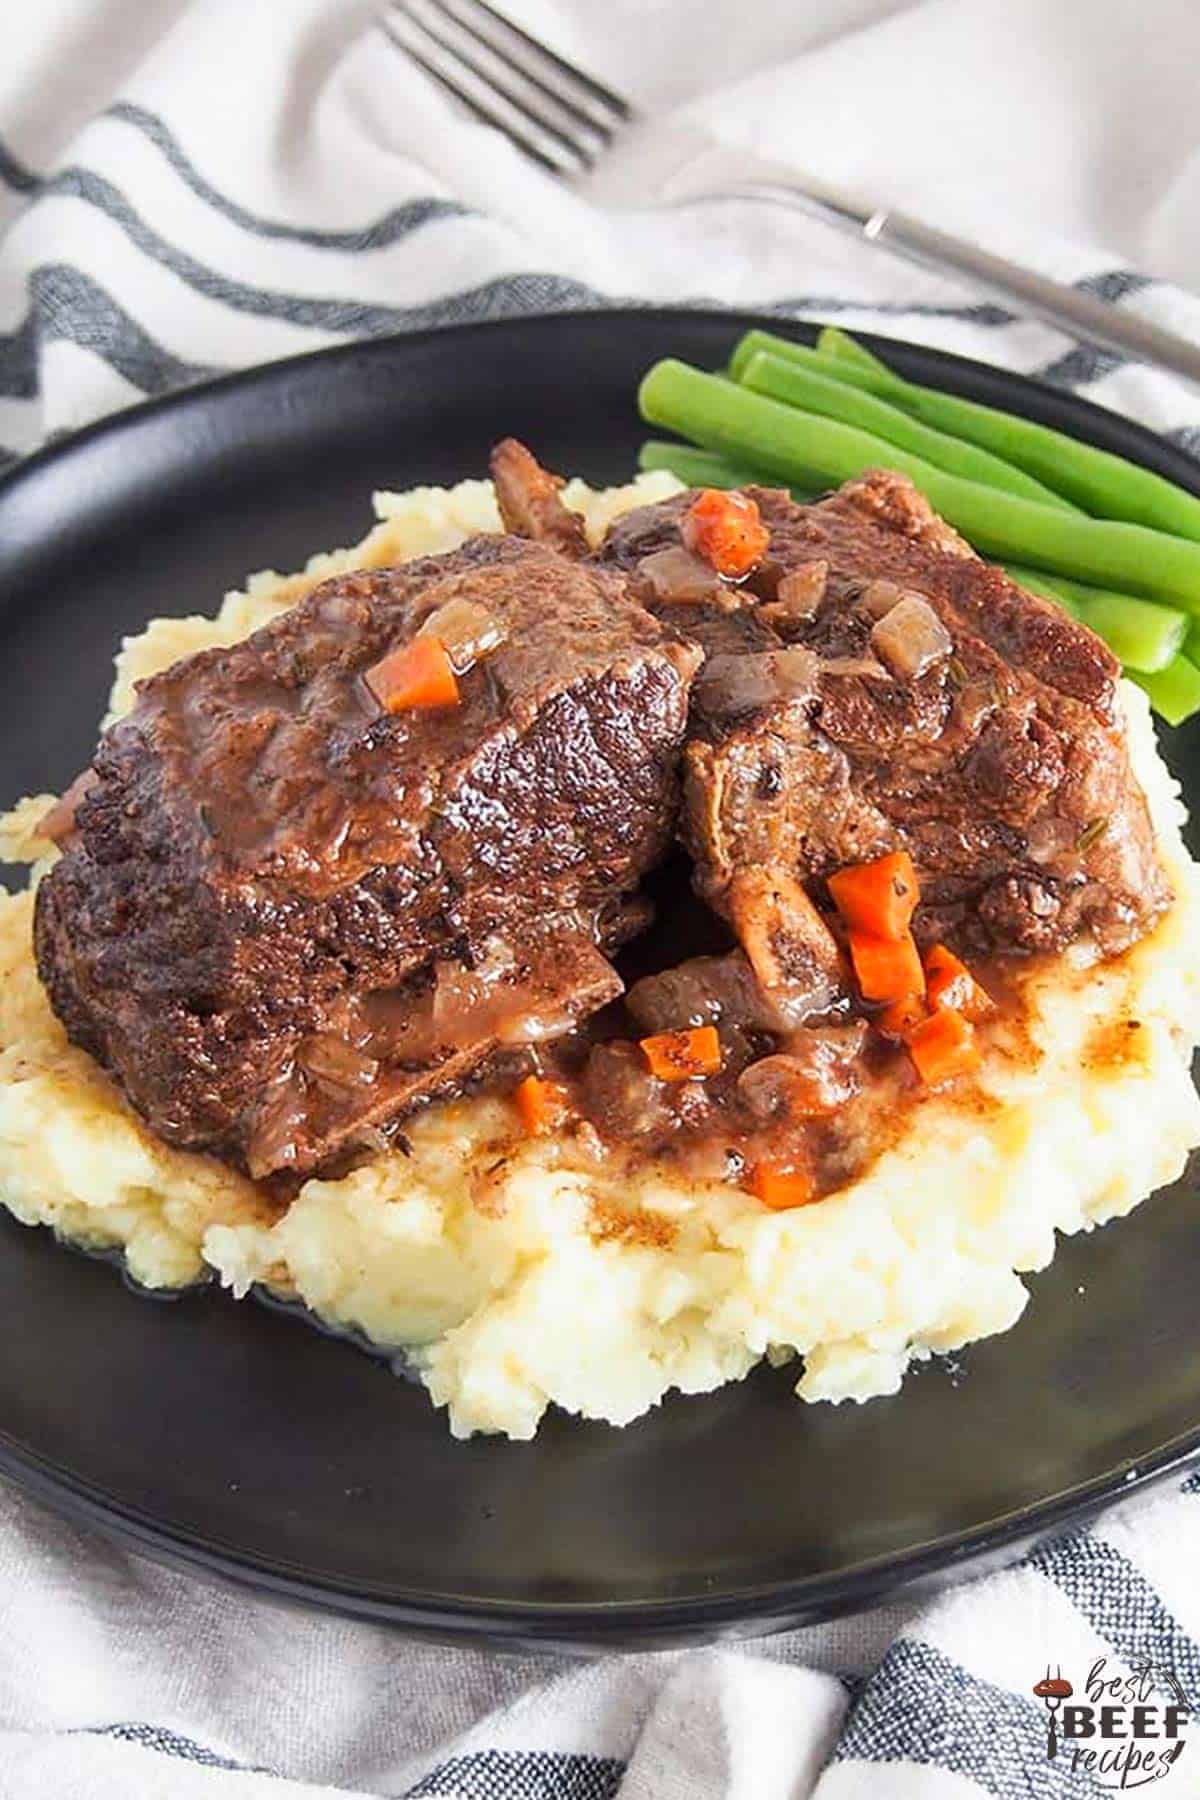 Slow cooker beef ribs served over a bed of mashed potatoes on a black plate with a side of green beans and a decorative white dish towel underneath